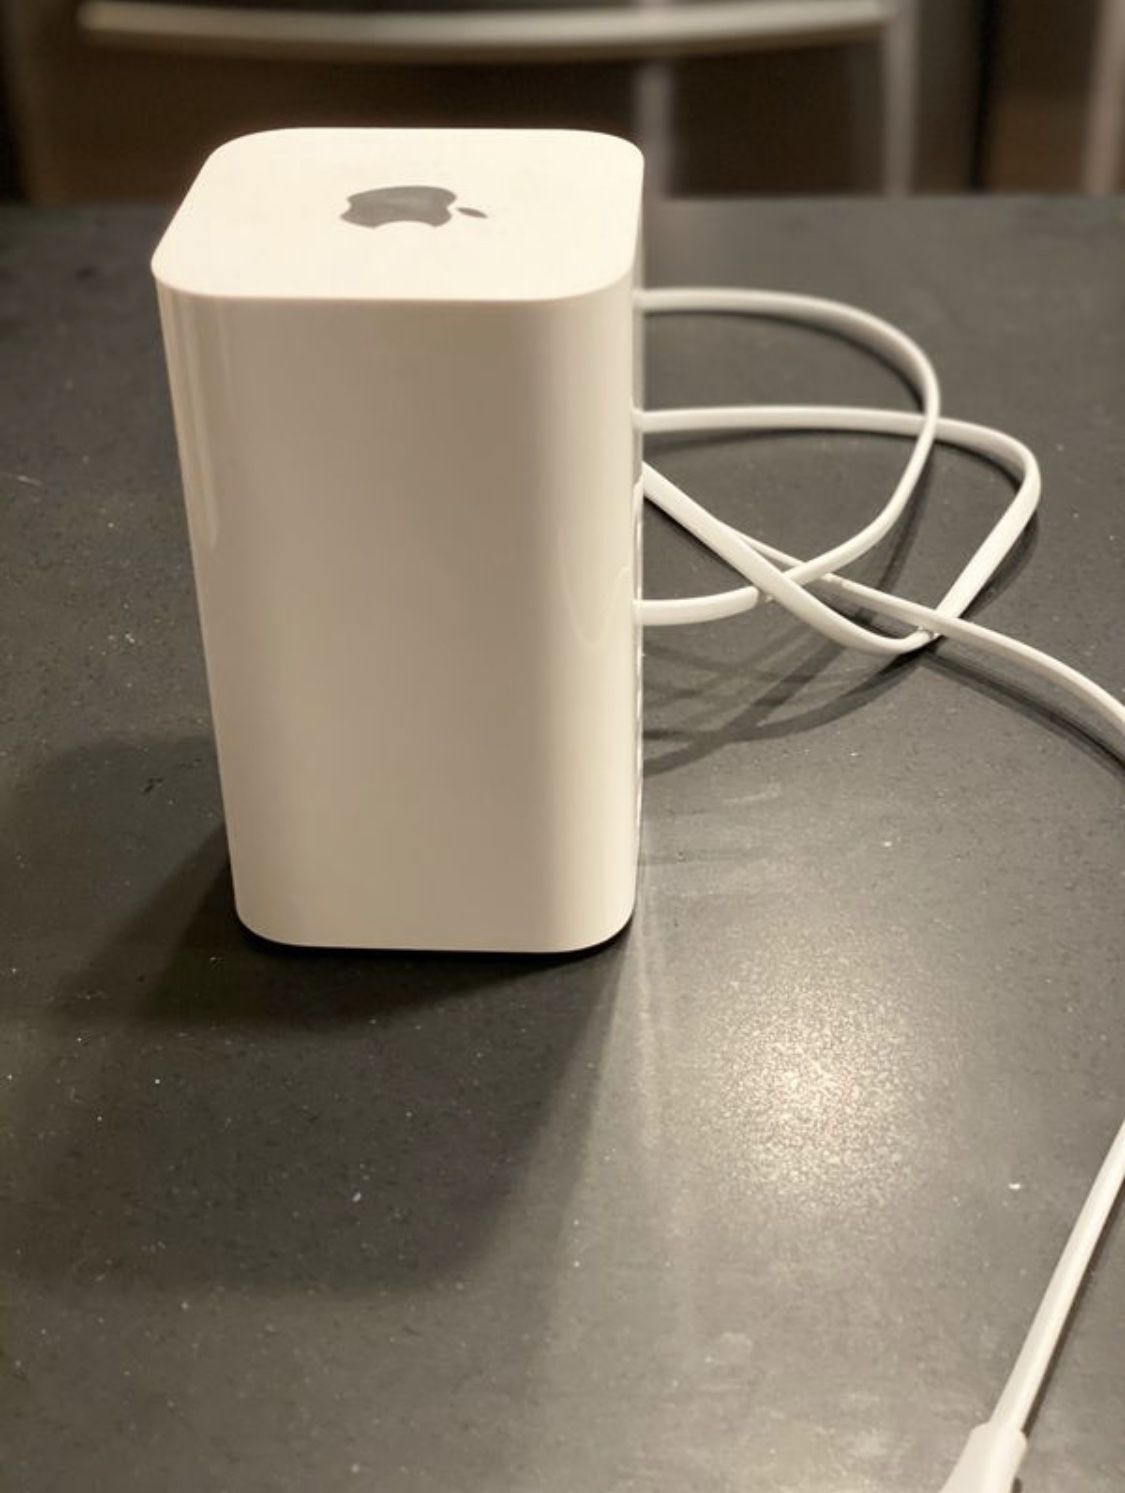 Apple AirPort Time Capsule (5th Generation) - Wireless AC Router & Hard Drive Combo - 1TB